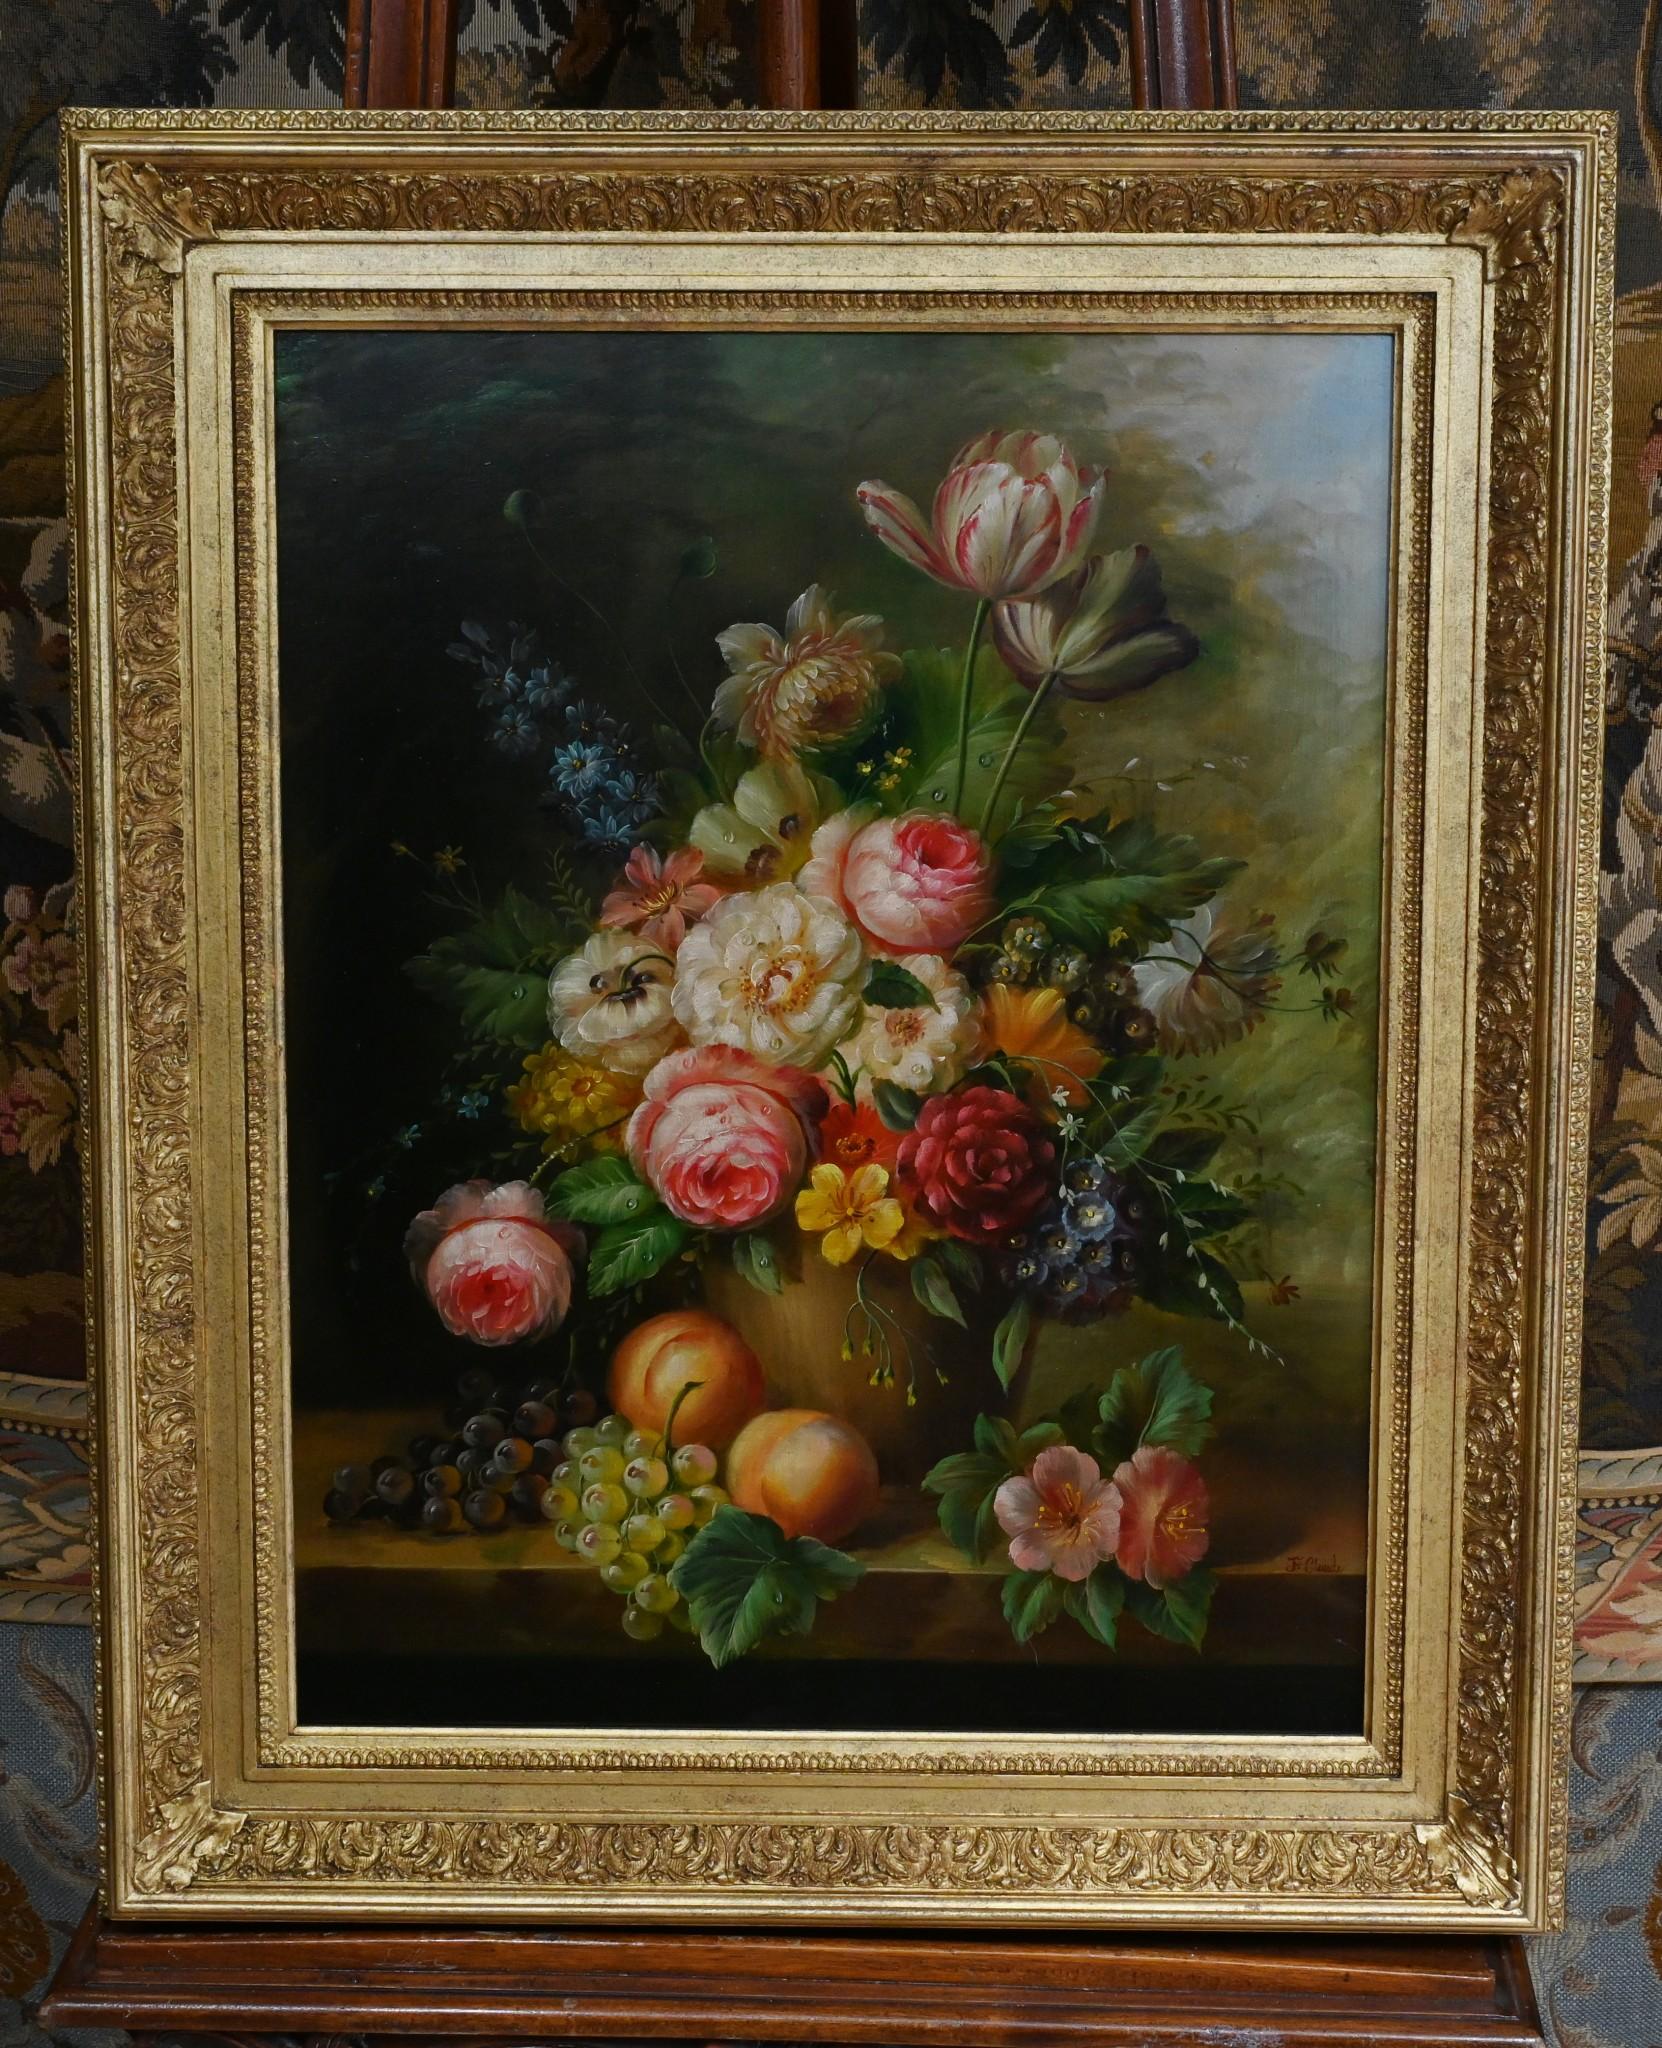 Absolutely stunning Victorian style still life floral oil painting
So vivid and bright would add light and energy to any room
Brush work so detailed and the choice of colours works so well
Piece is signed F . Claude in the bottom right corner
Comes